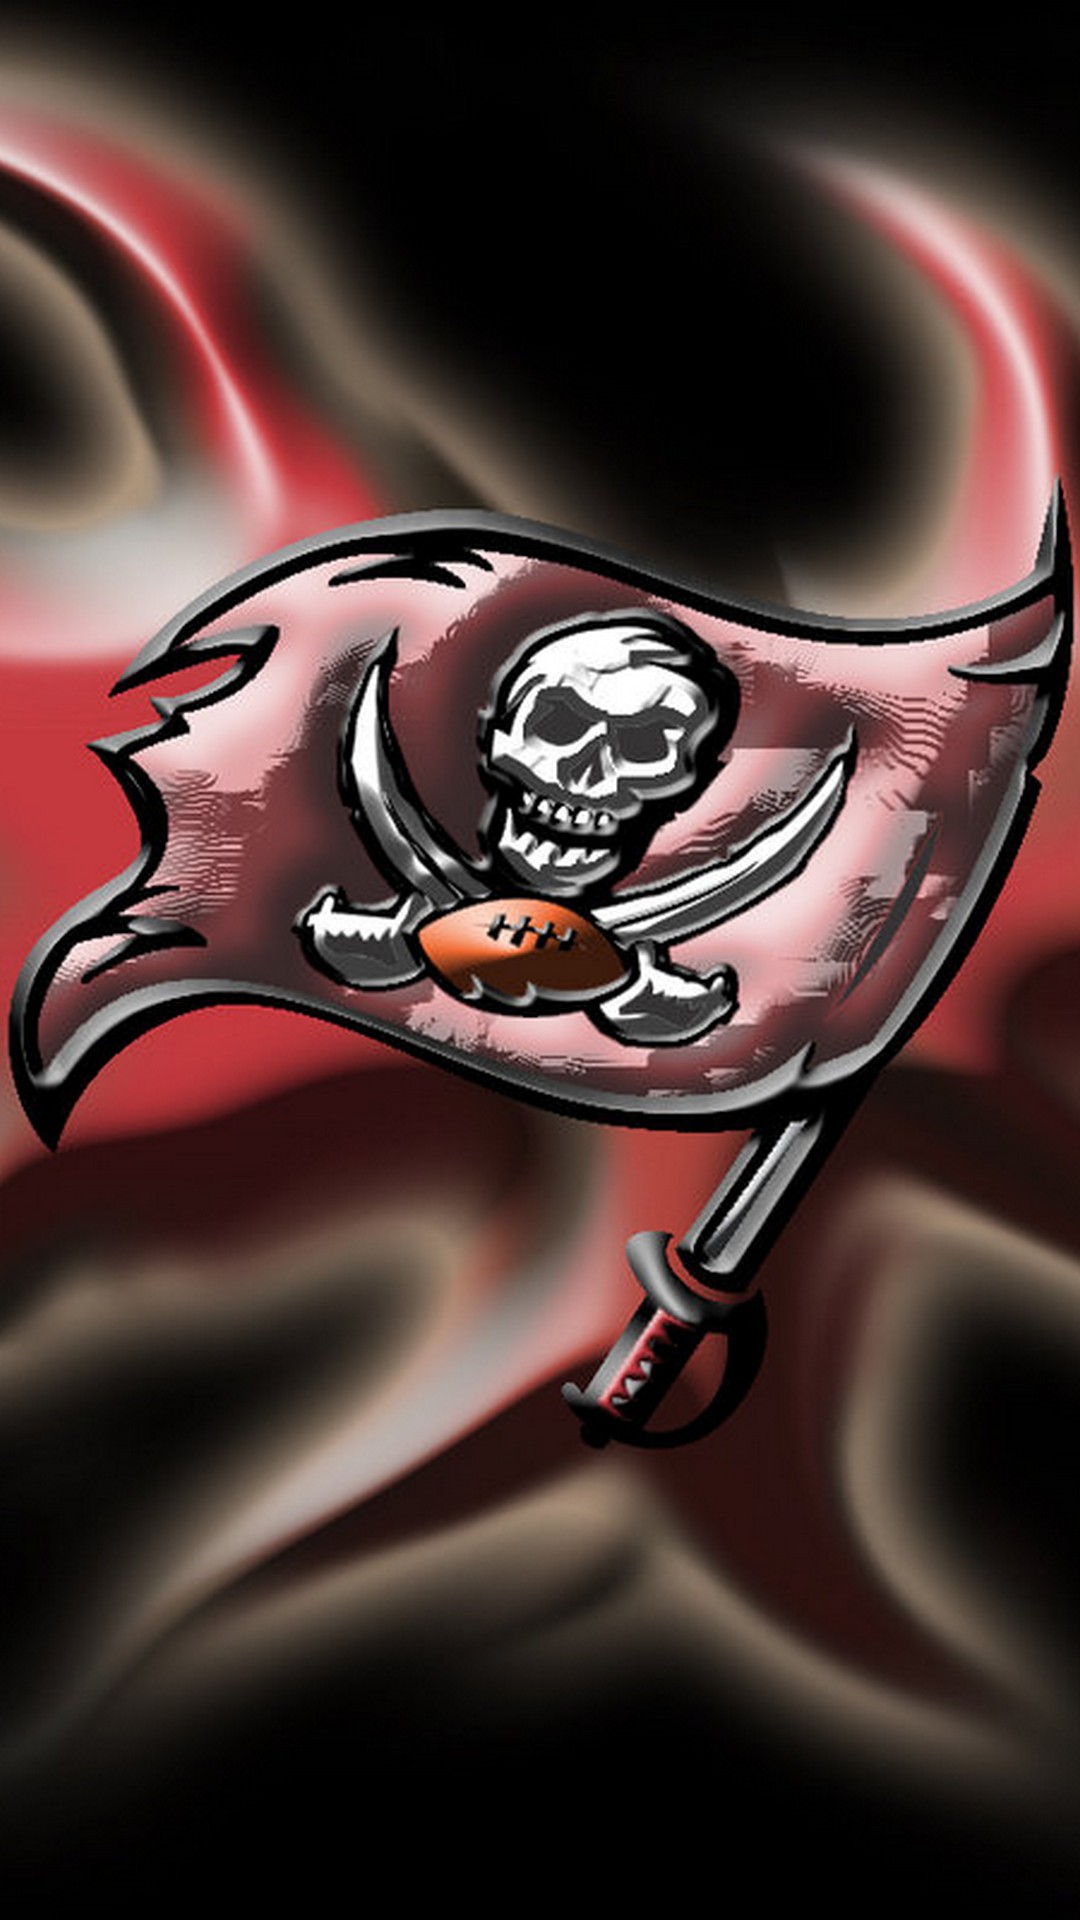 Tampa Bay Buccaneers iPhone Wallpaper High Quality with high-resolution 1080x1920 pixel. Donwload and set as wallpaper for your iPhone X, iPhone XS home screen backgrounds, XS Max, XR, iPhone8 lock screen wallpaper, iPhone 7, 6, SE and other mobile devices